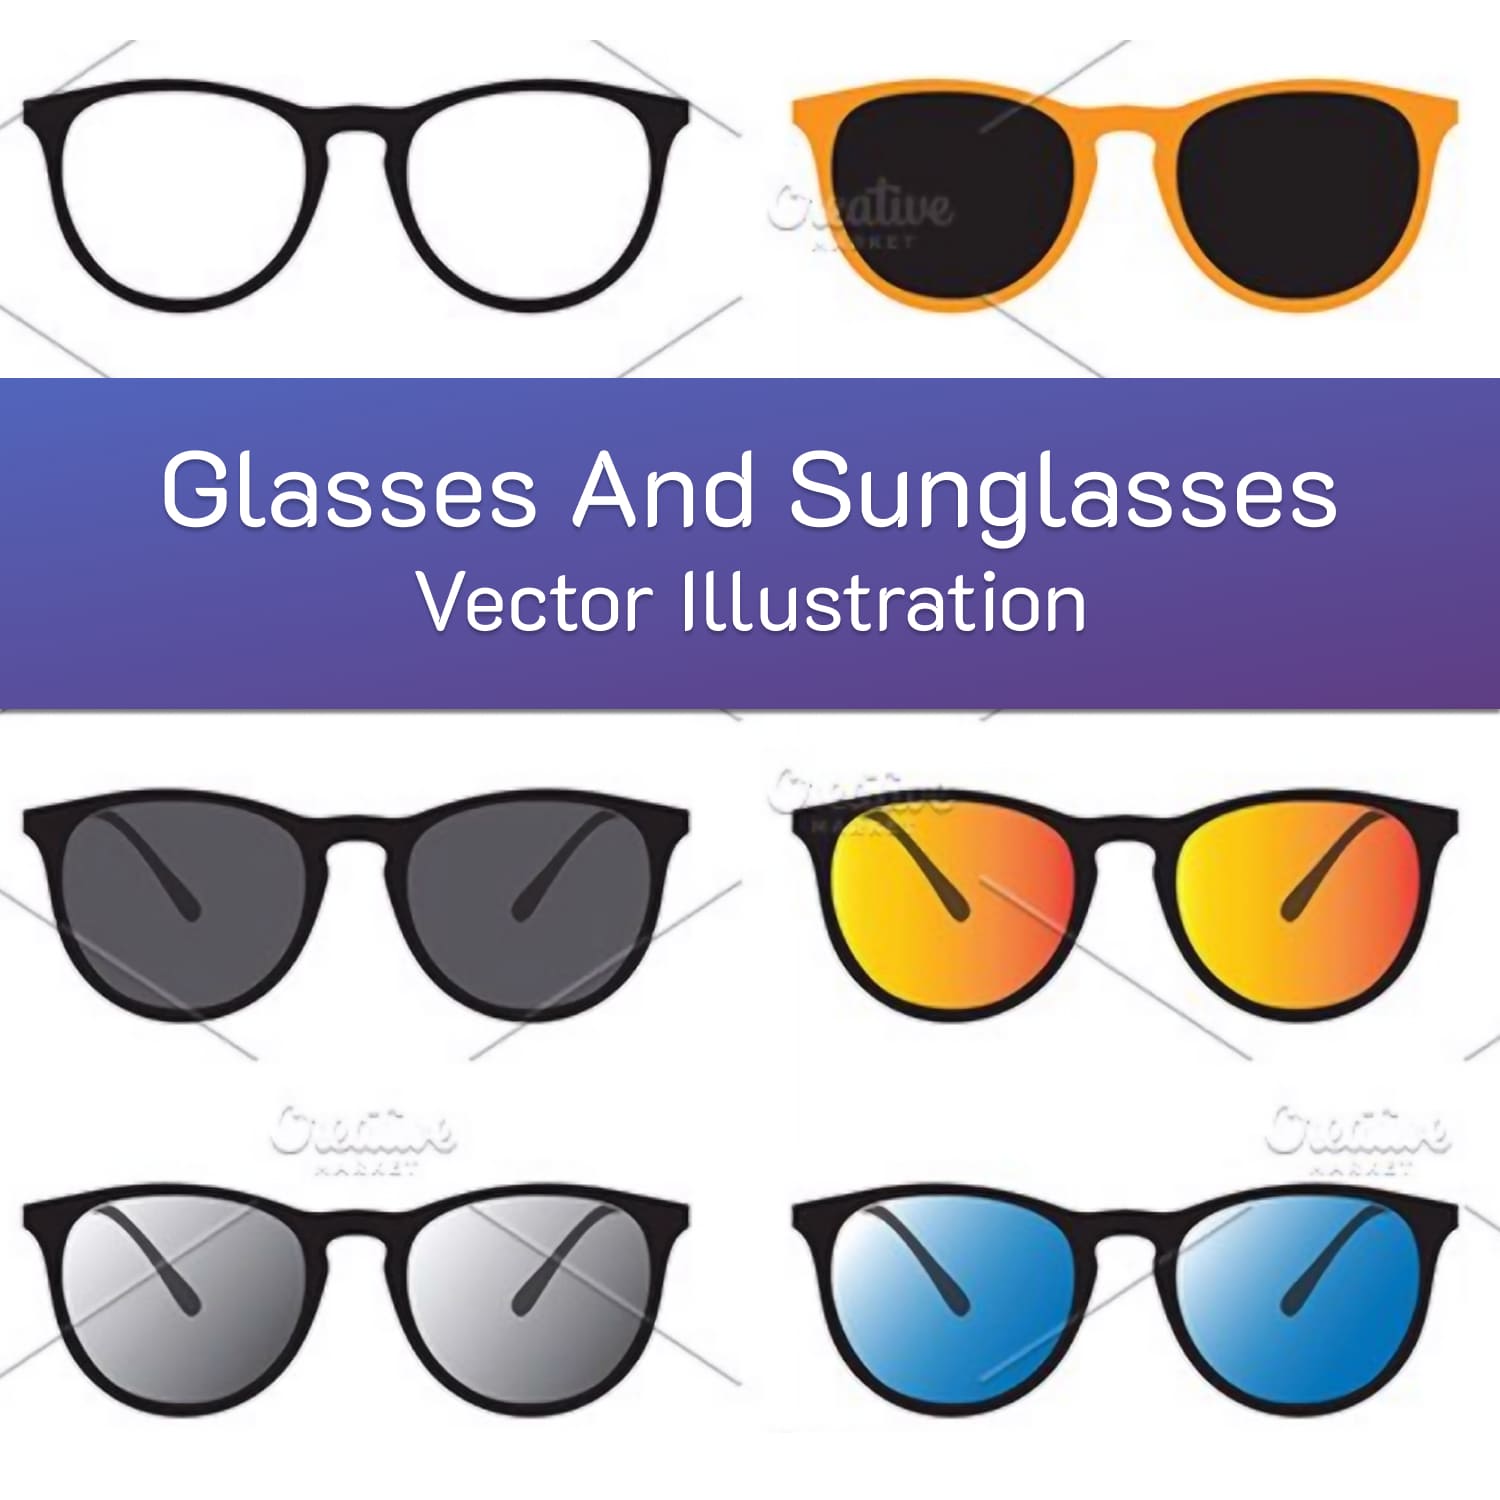 Vector of glasses and sunglasses, main picture.